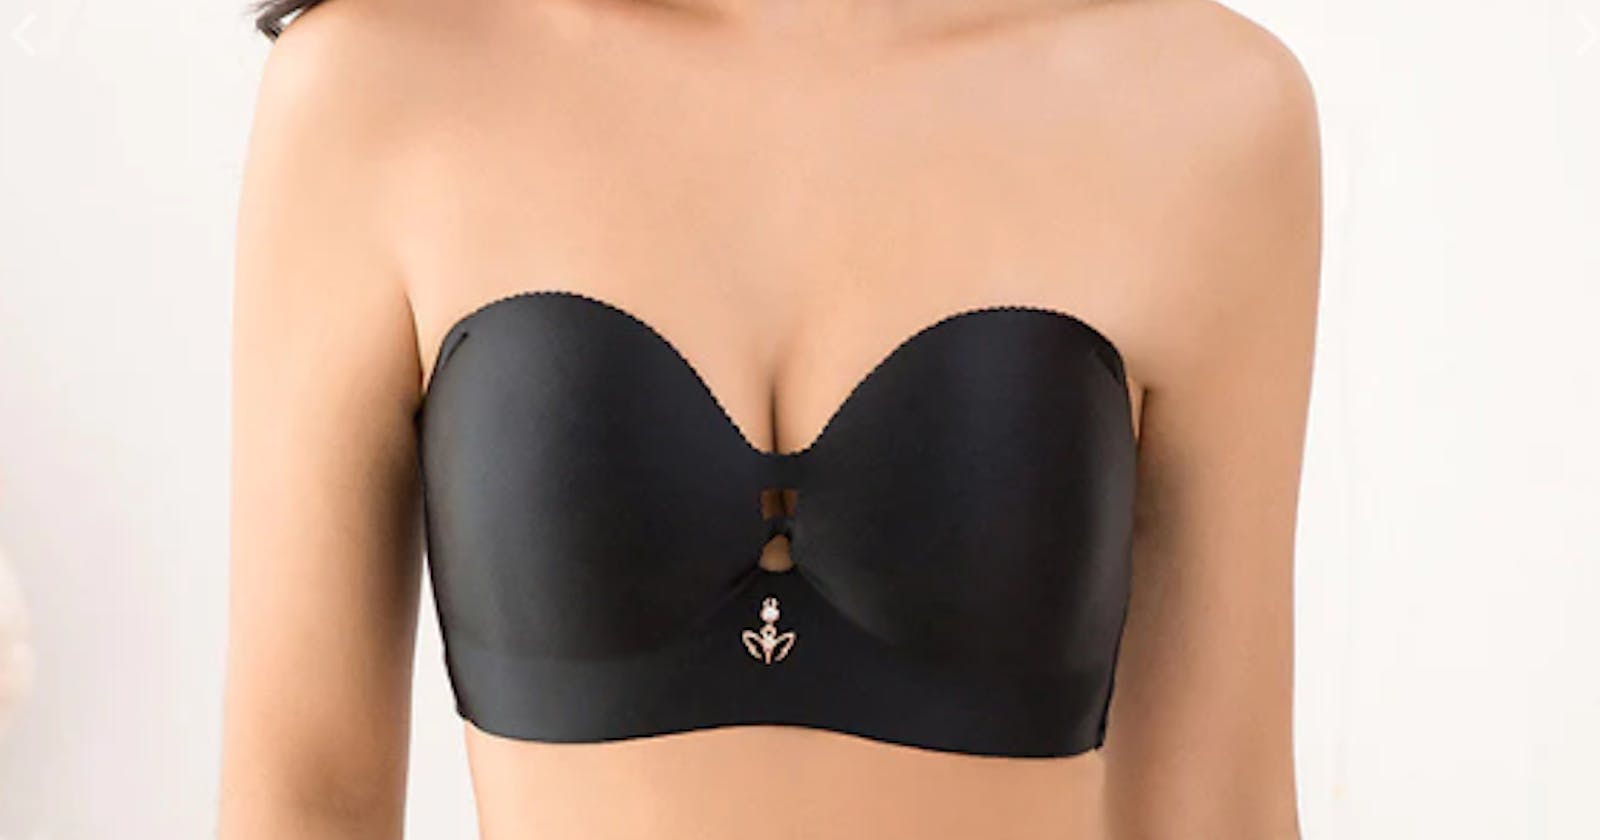 Fabulous One Strapless Bra Reviews: Is this website selling an amazing women's bra?